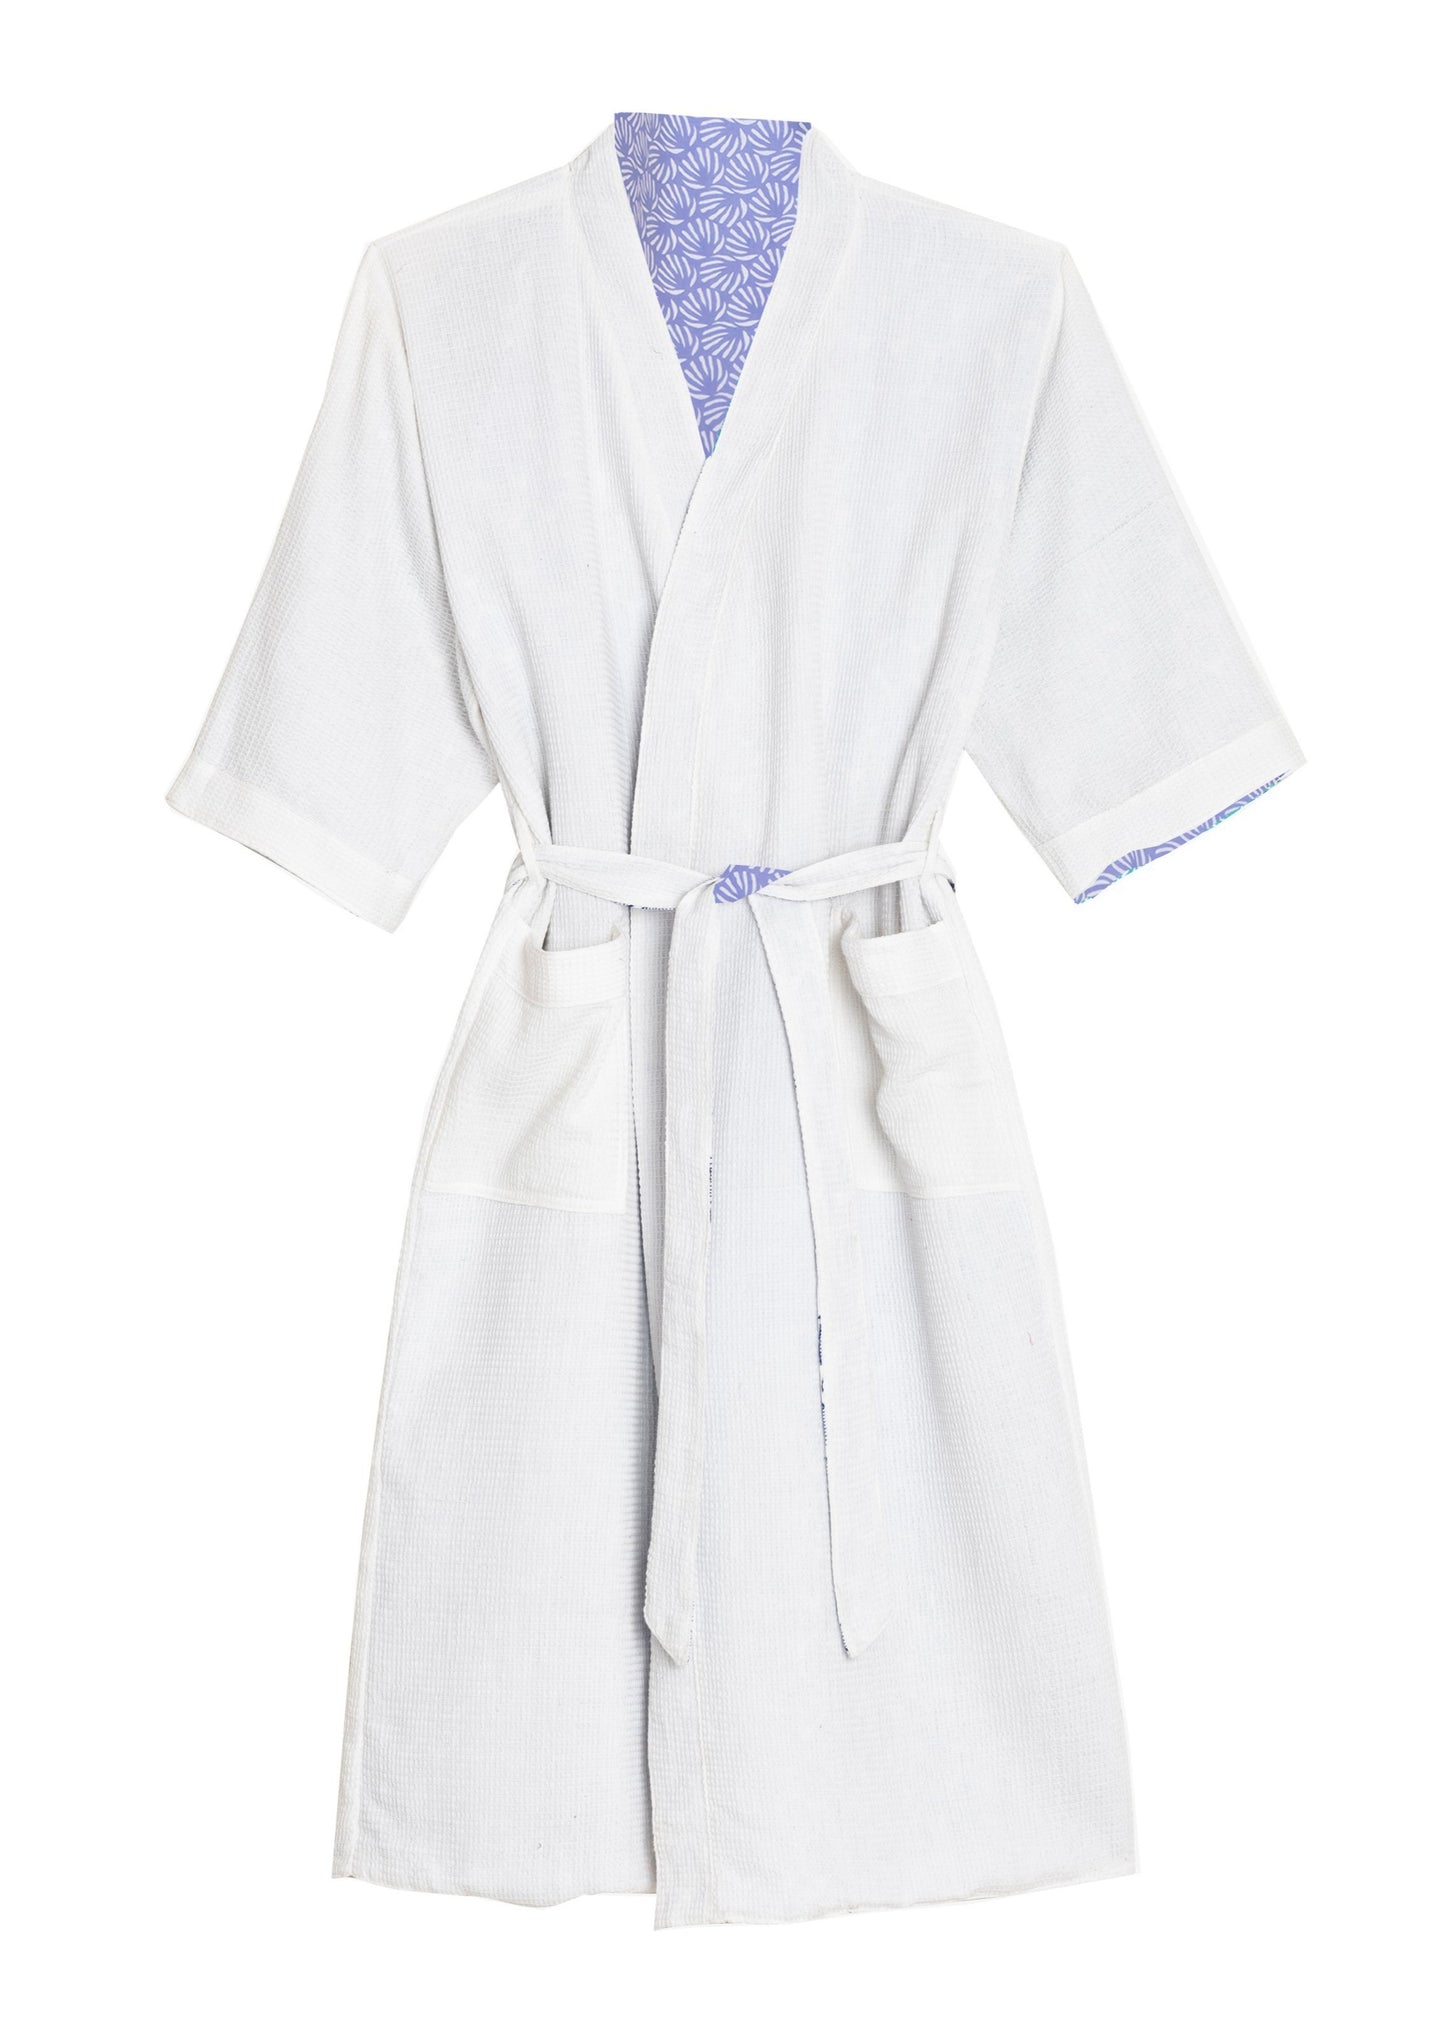 Organic Cotton Dressing Gown in Blue with Waffle Lining